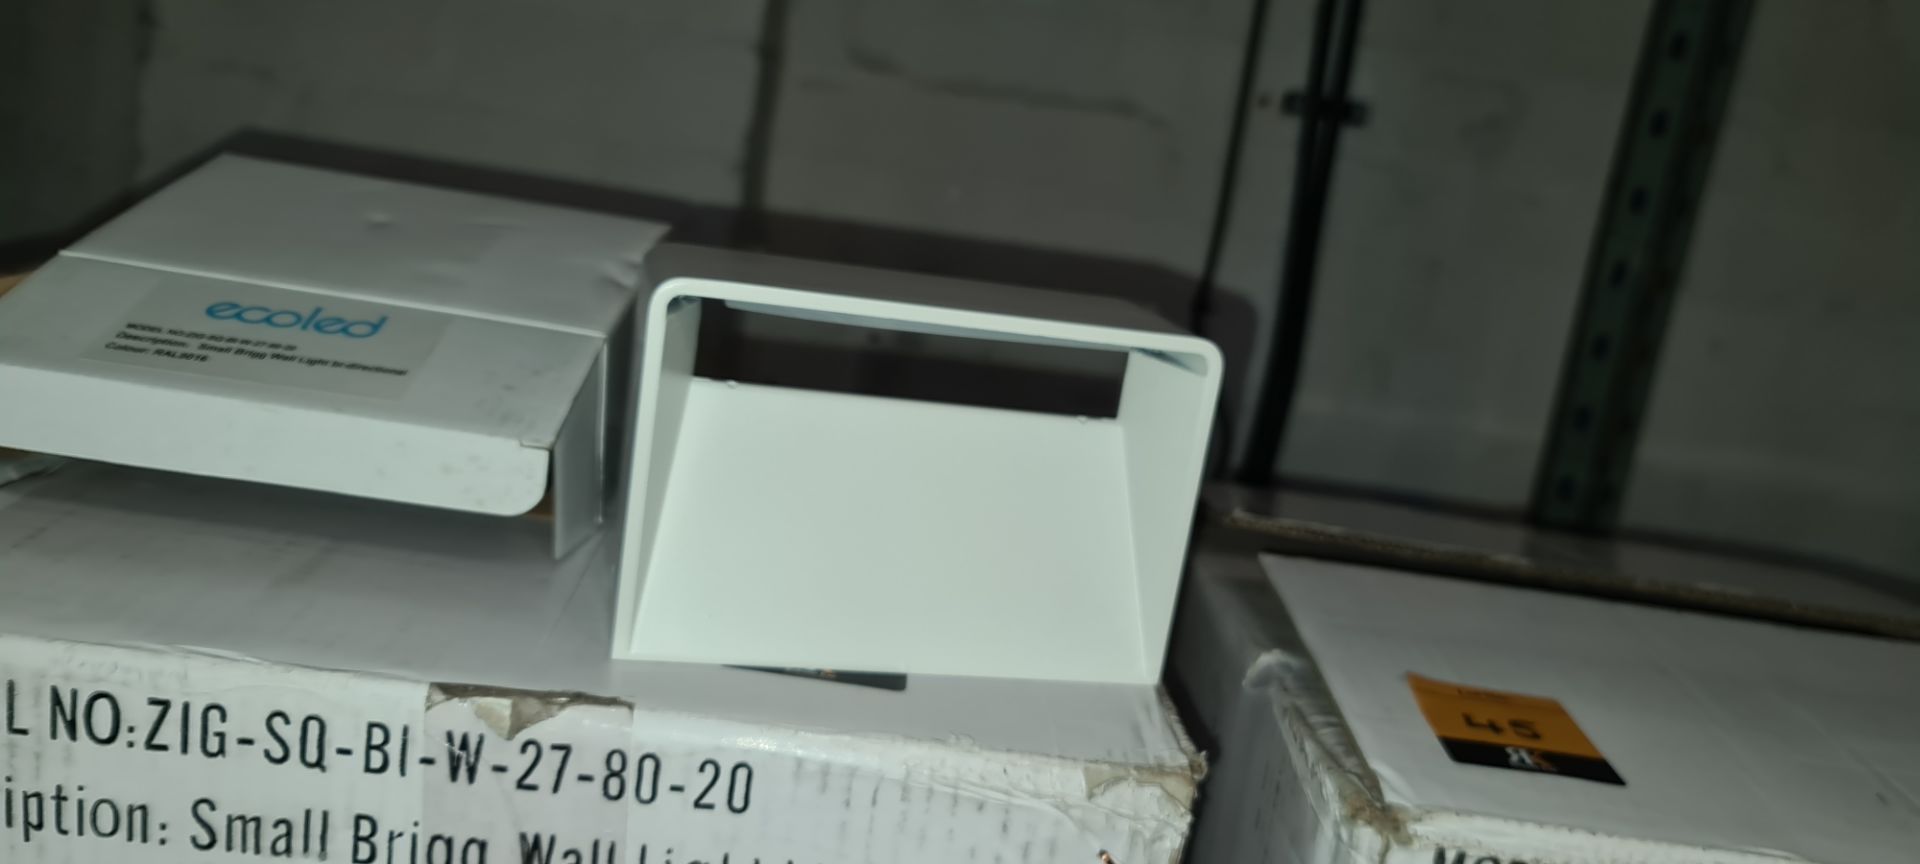 20 off small Brigg wall light (bi-directional), colour white (RAL9016), model ZIG-SQ-BL-W-27-80-20 - Image 12 of 14